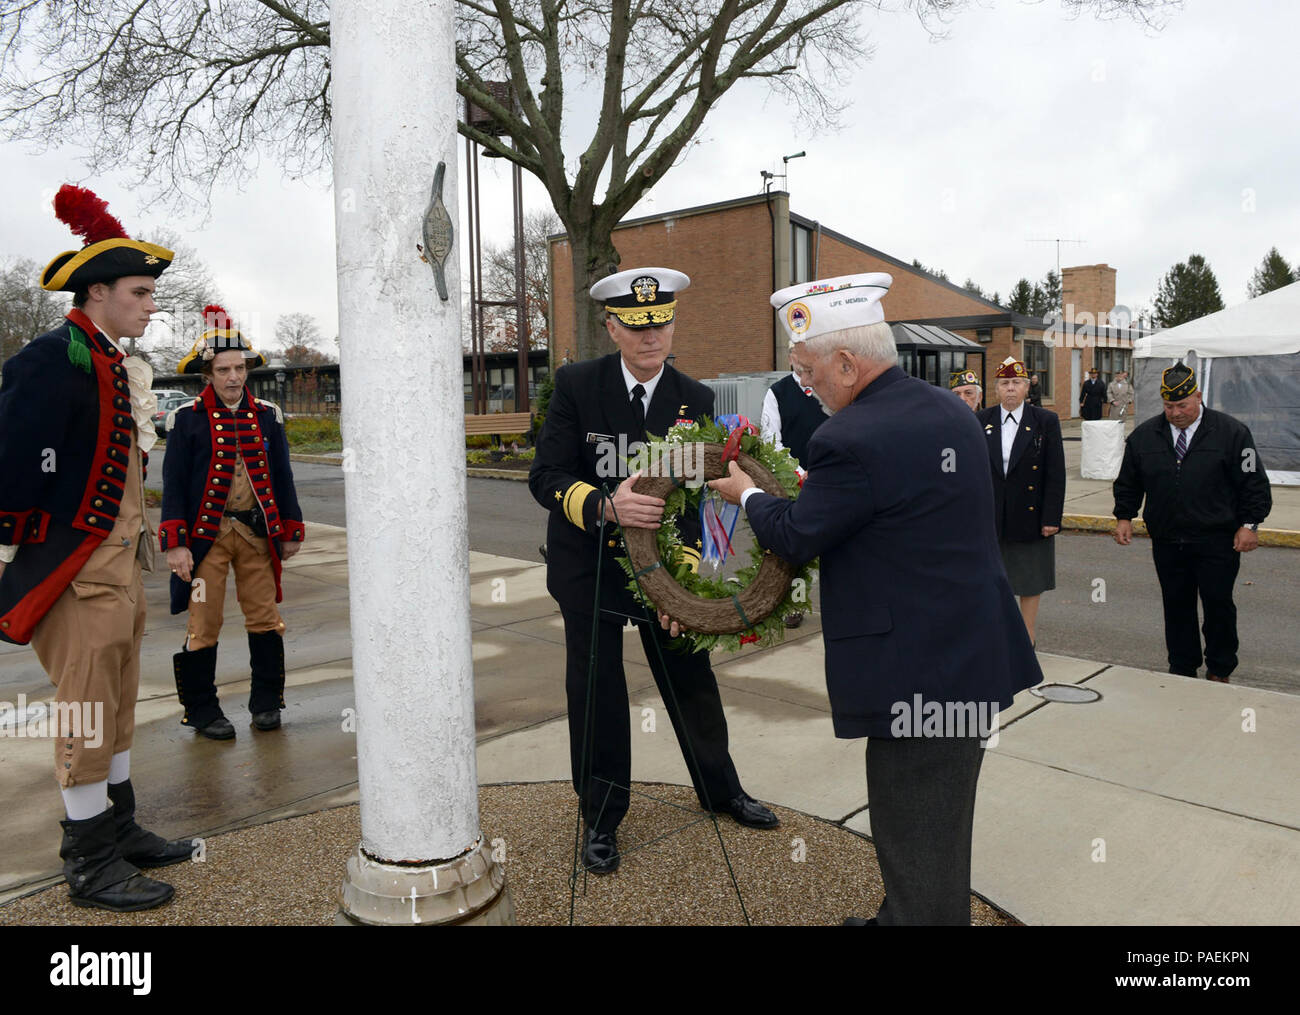 BRISTOL, R.I. (Nov. 11, 2015) Rear Adm. P. Gardner Howe III, president, U.S. Naval War College, and Richard Enos, president, Bristol Veterans Council, participate in a wreath-laying commemoration with Rhode Island veterans during the 2015 Veterans Day ceremony at the R.I. Veterans Home in Bristol, R.I.  In addition to the wreath-laying commemoration, Howe also provided keynote remarks during the ceremony. Stock Photo